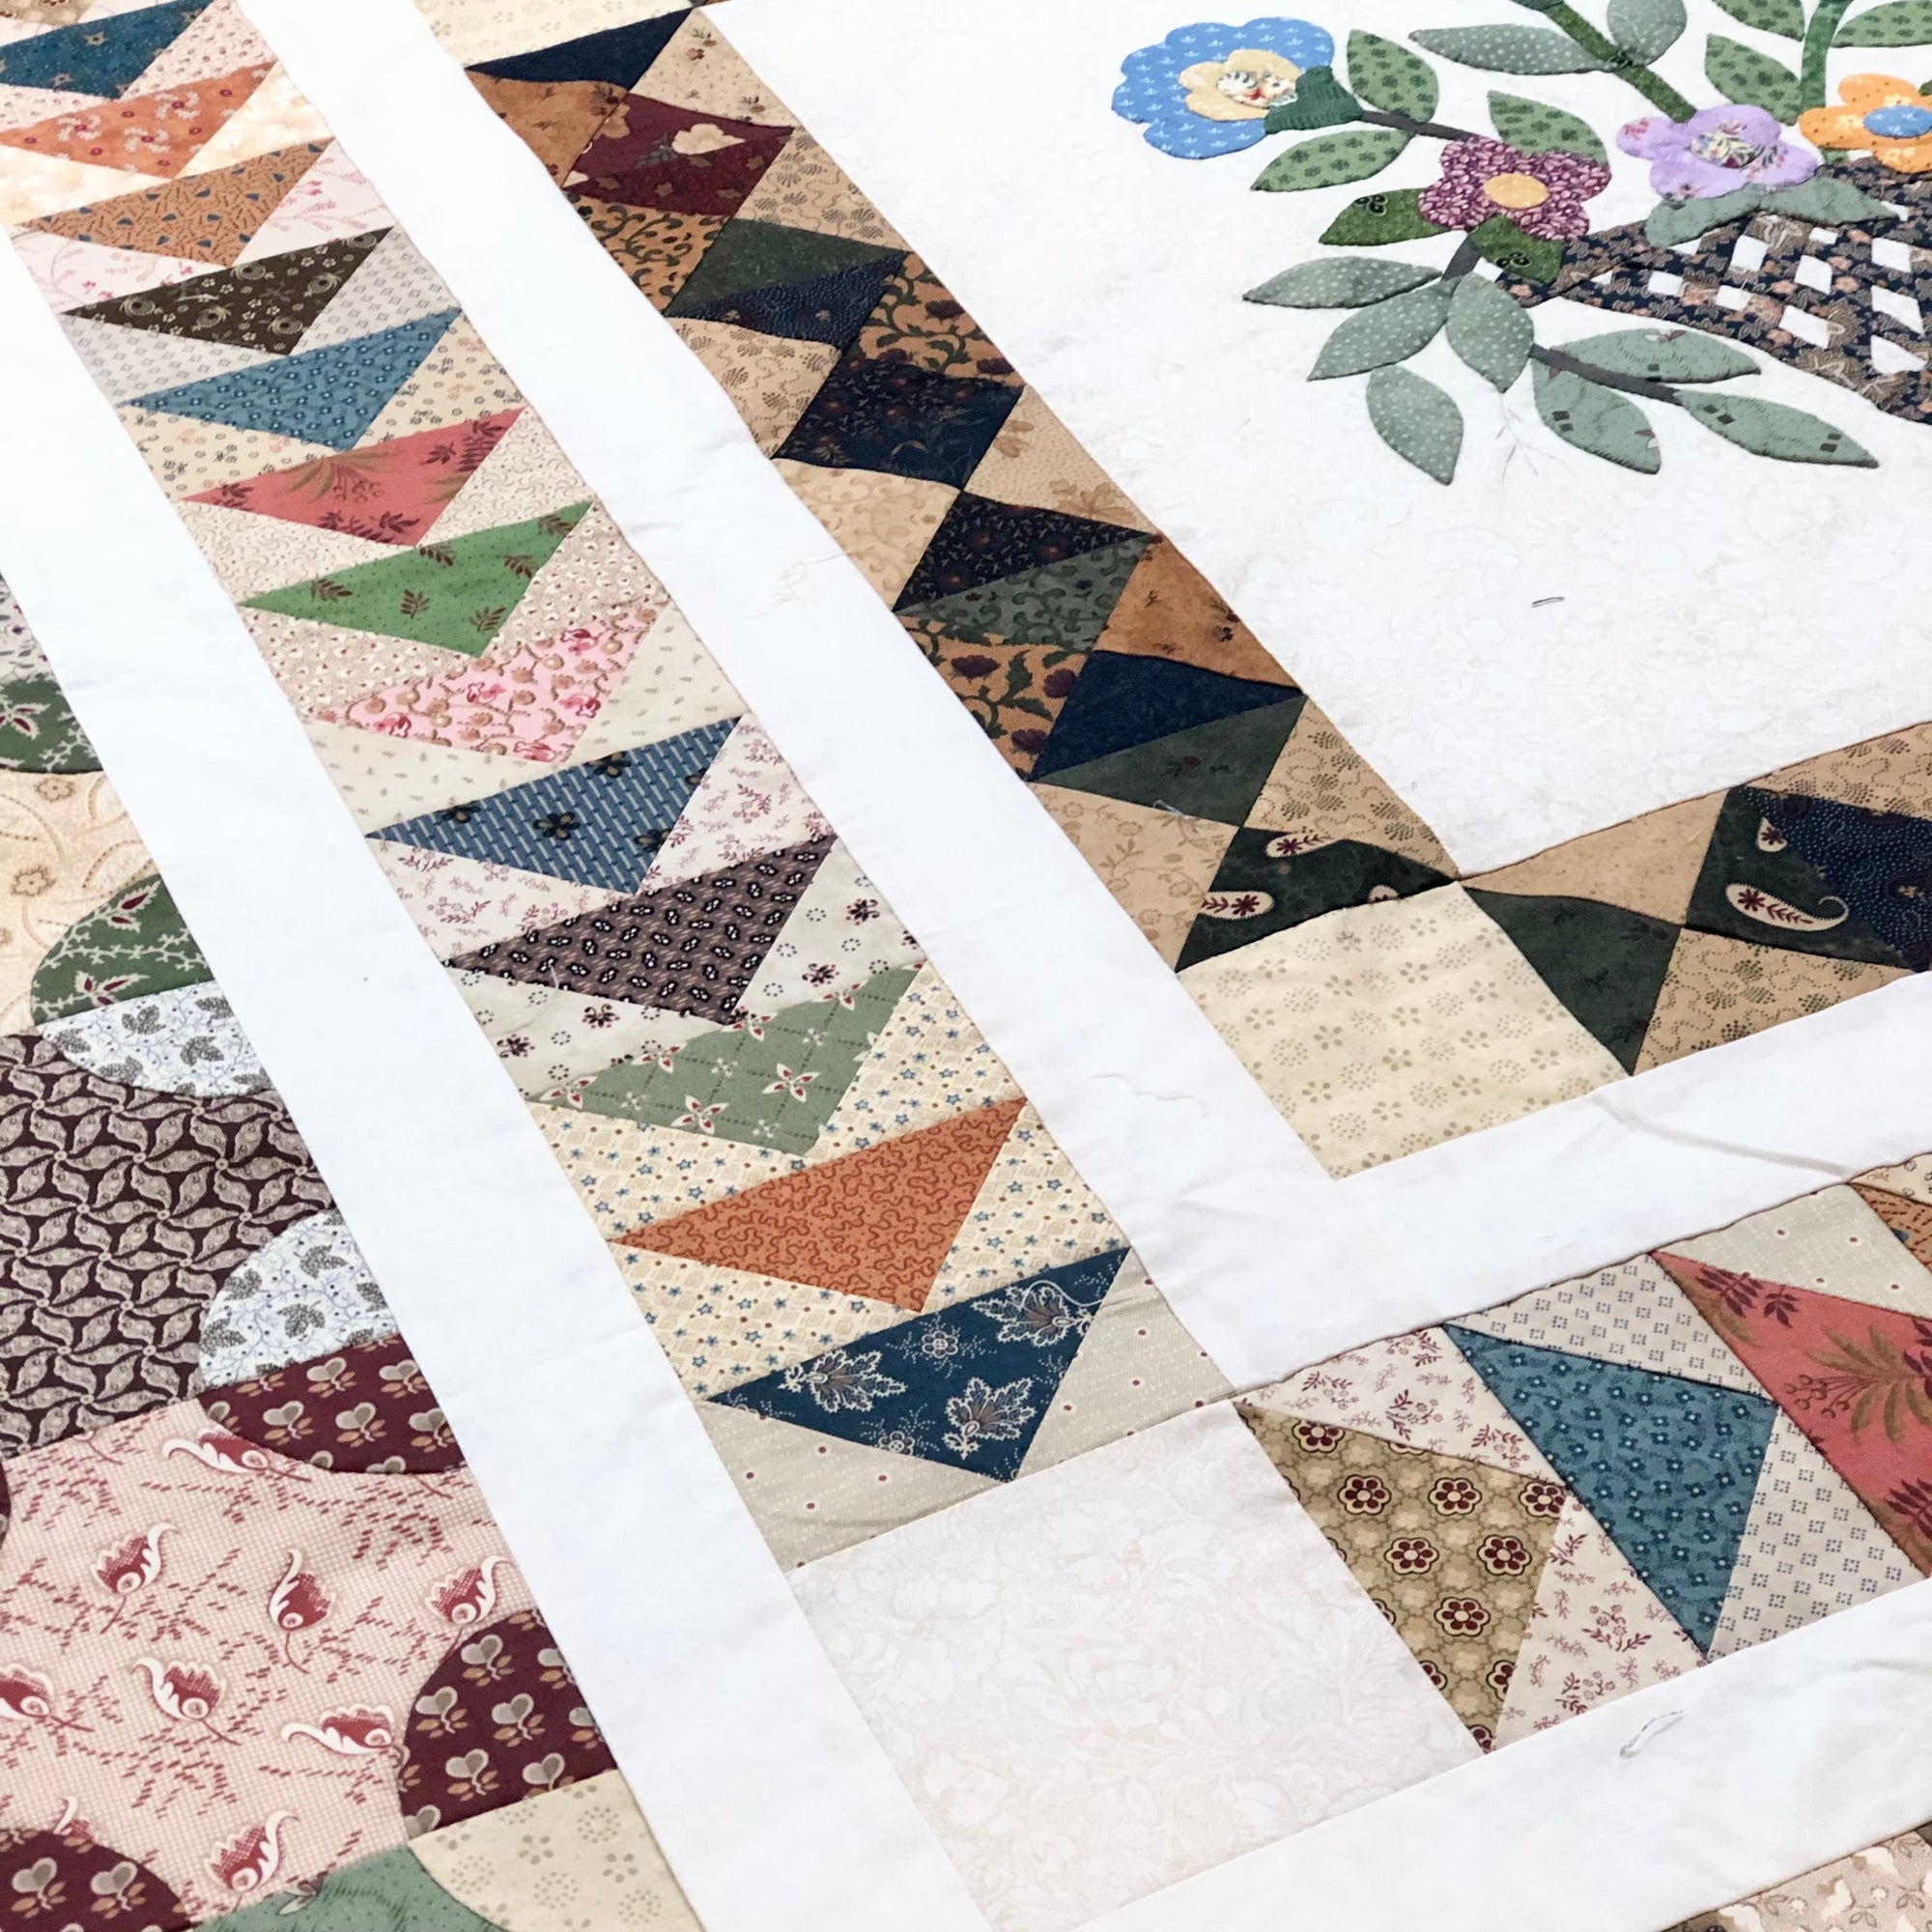 Quilting Drop In - Sunday May 26th 12pm to 3pm $19 per hour